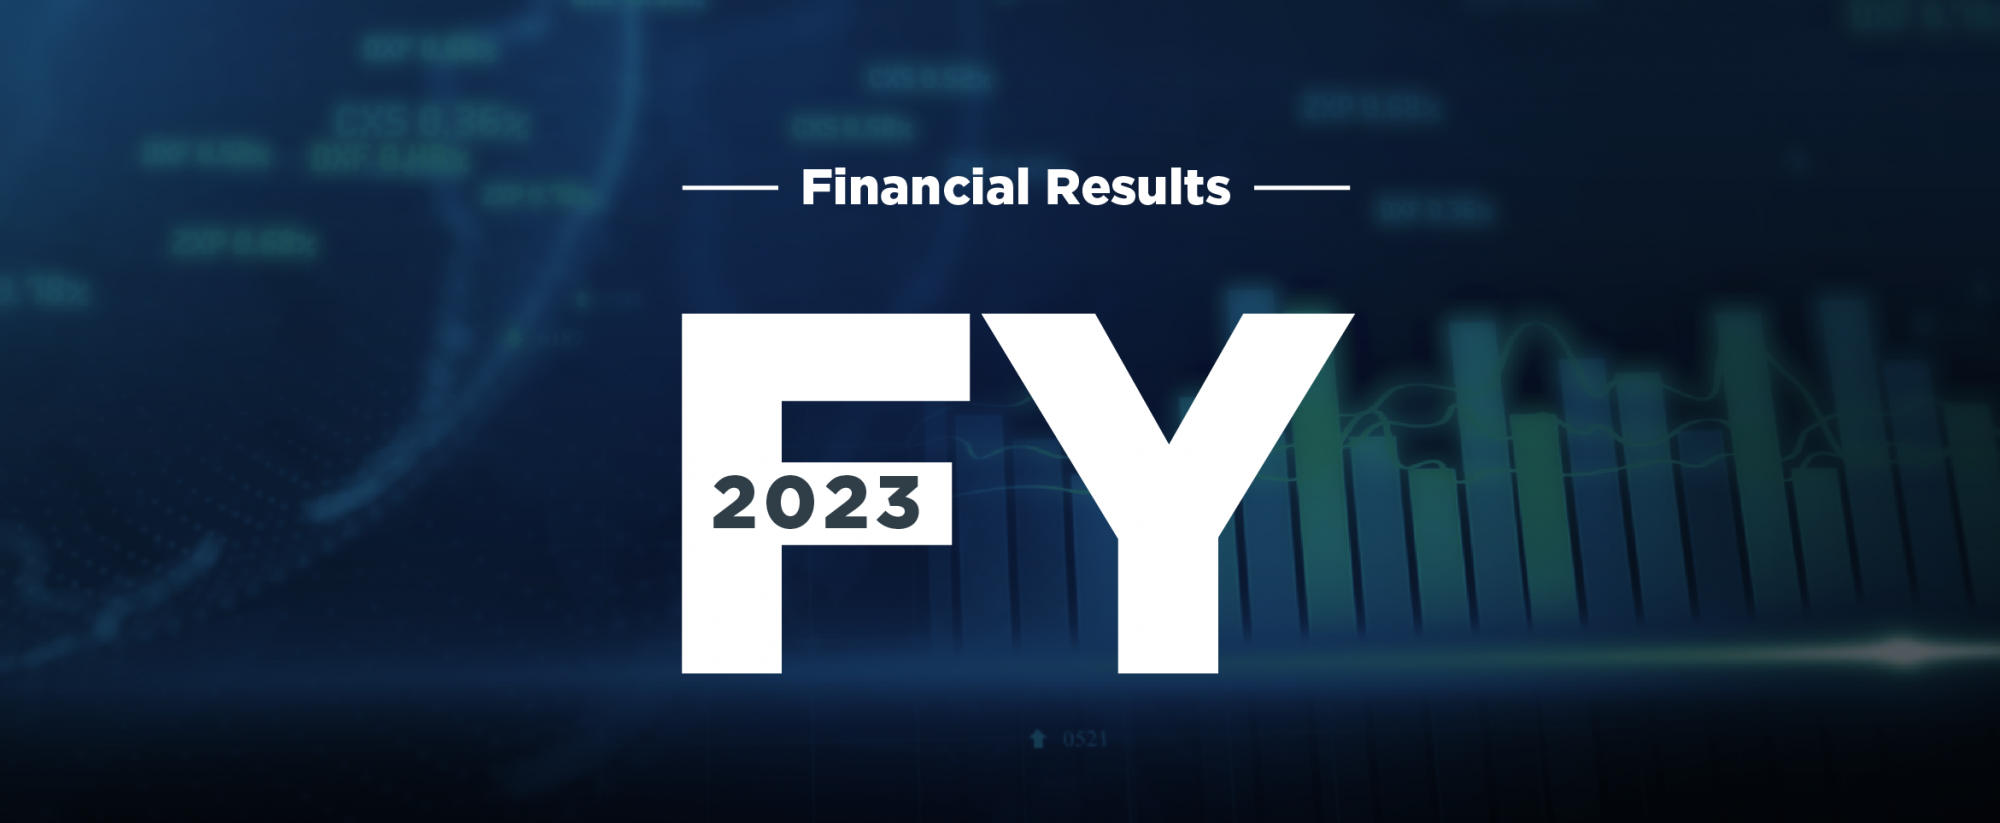 Multiply Group P.J.S.C Financial results  for Full Year 2023